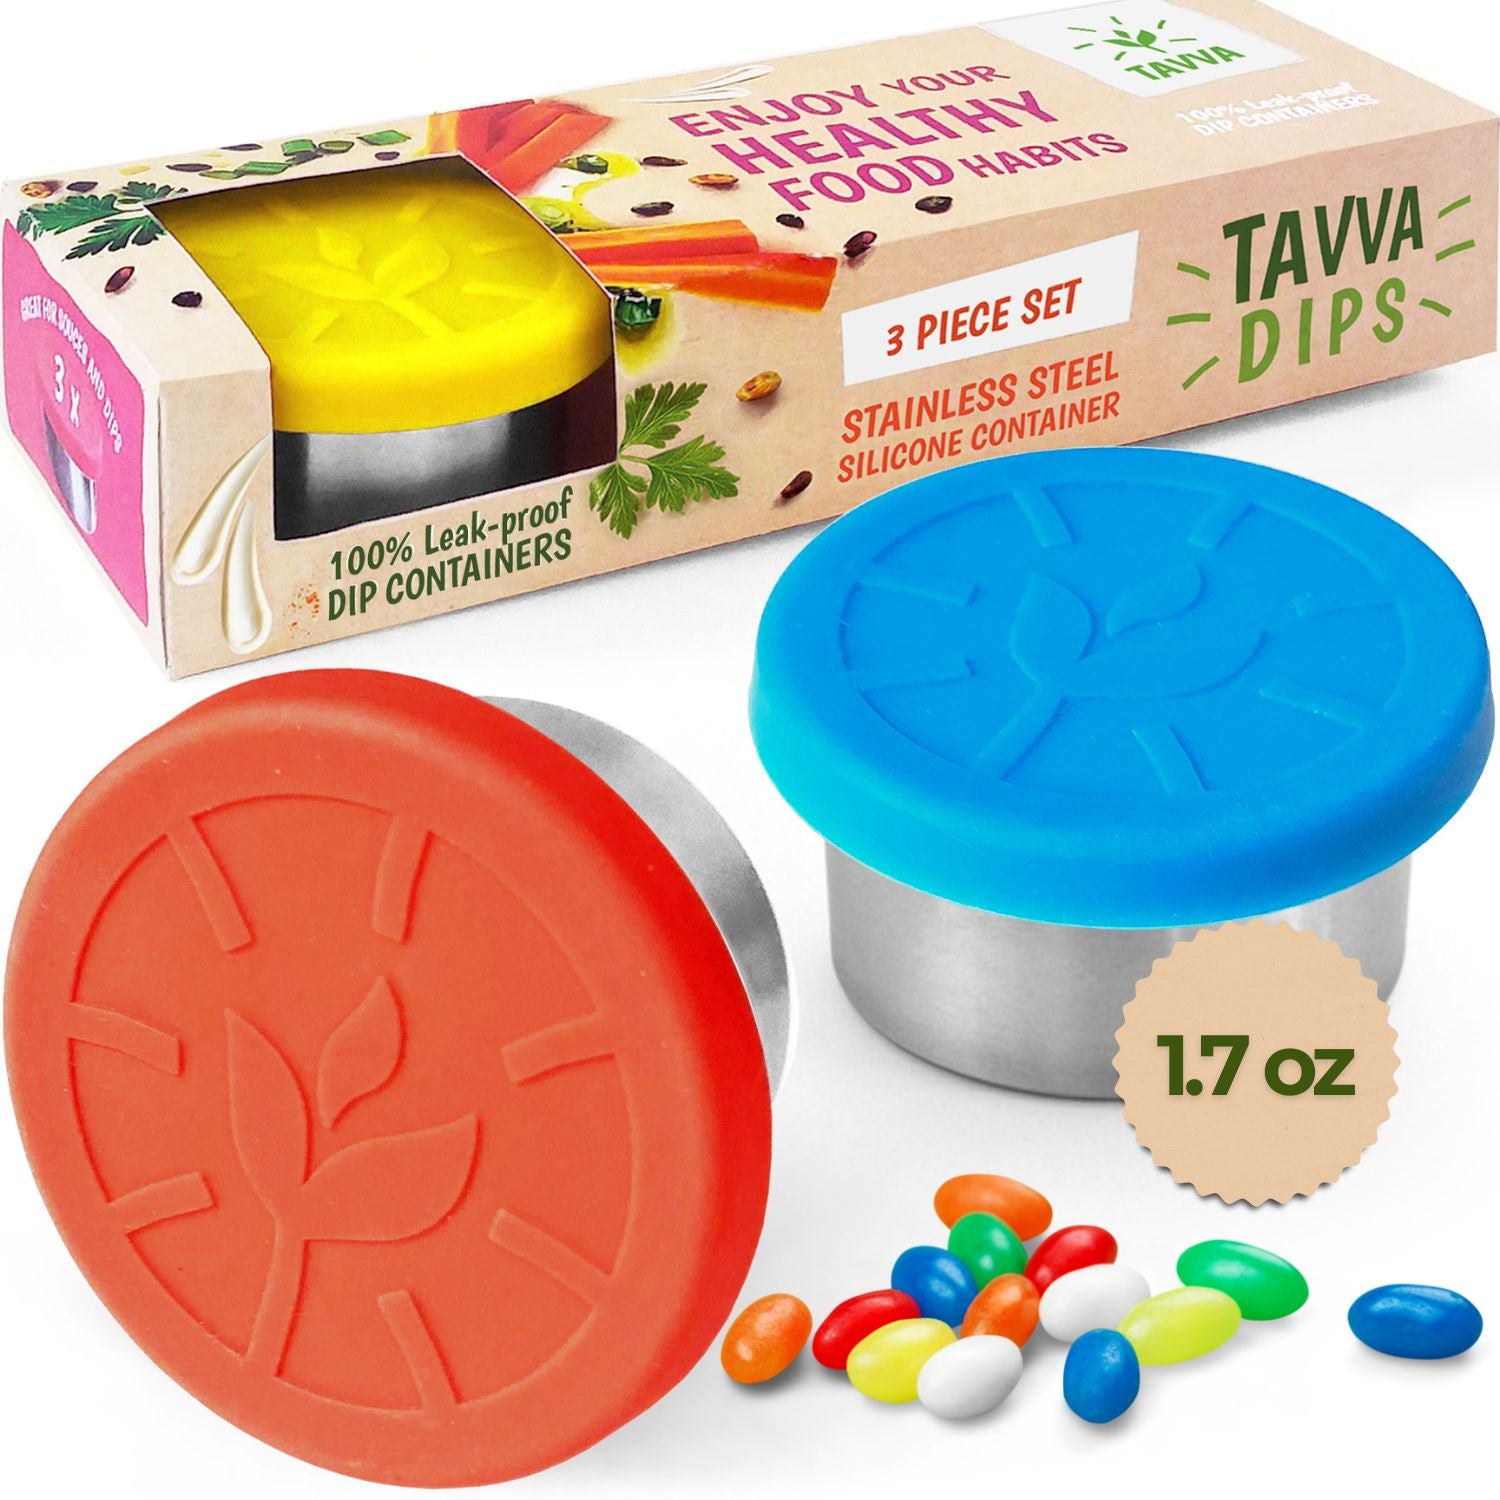 4 Mini Food Storage Containers, Leakproof Lids, Sauce Containers